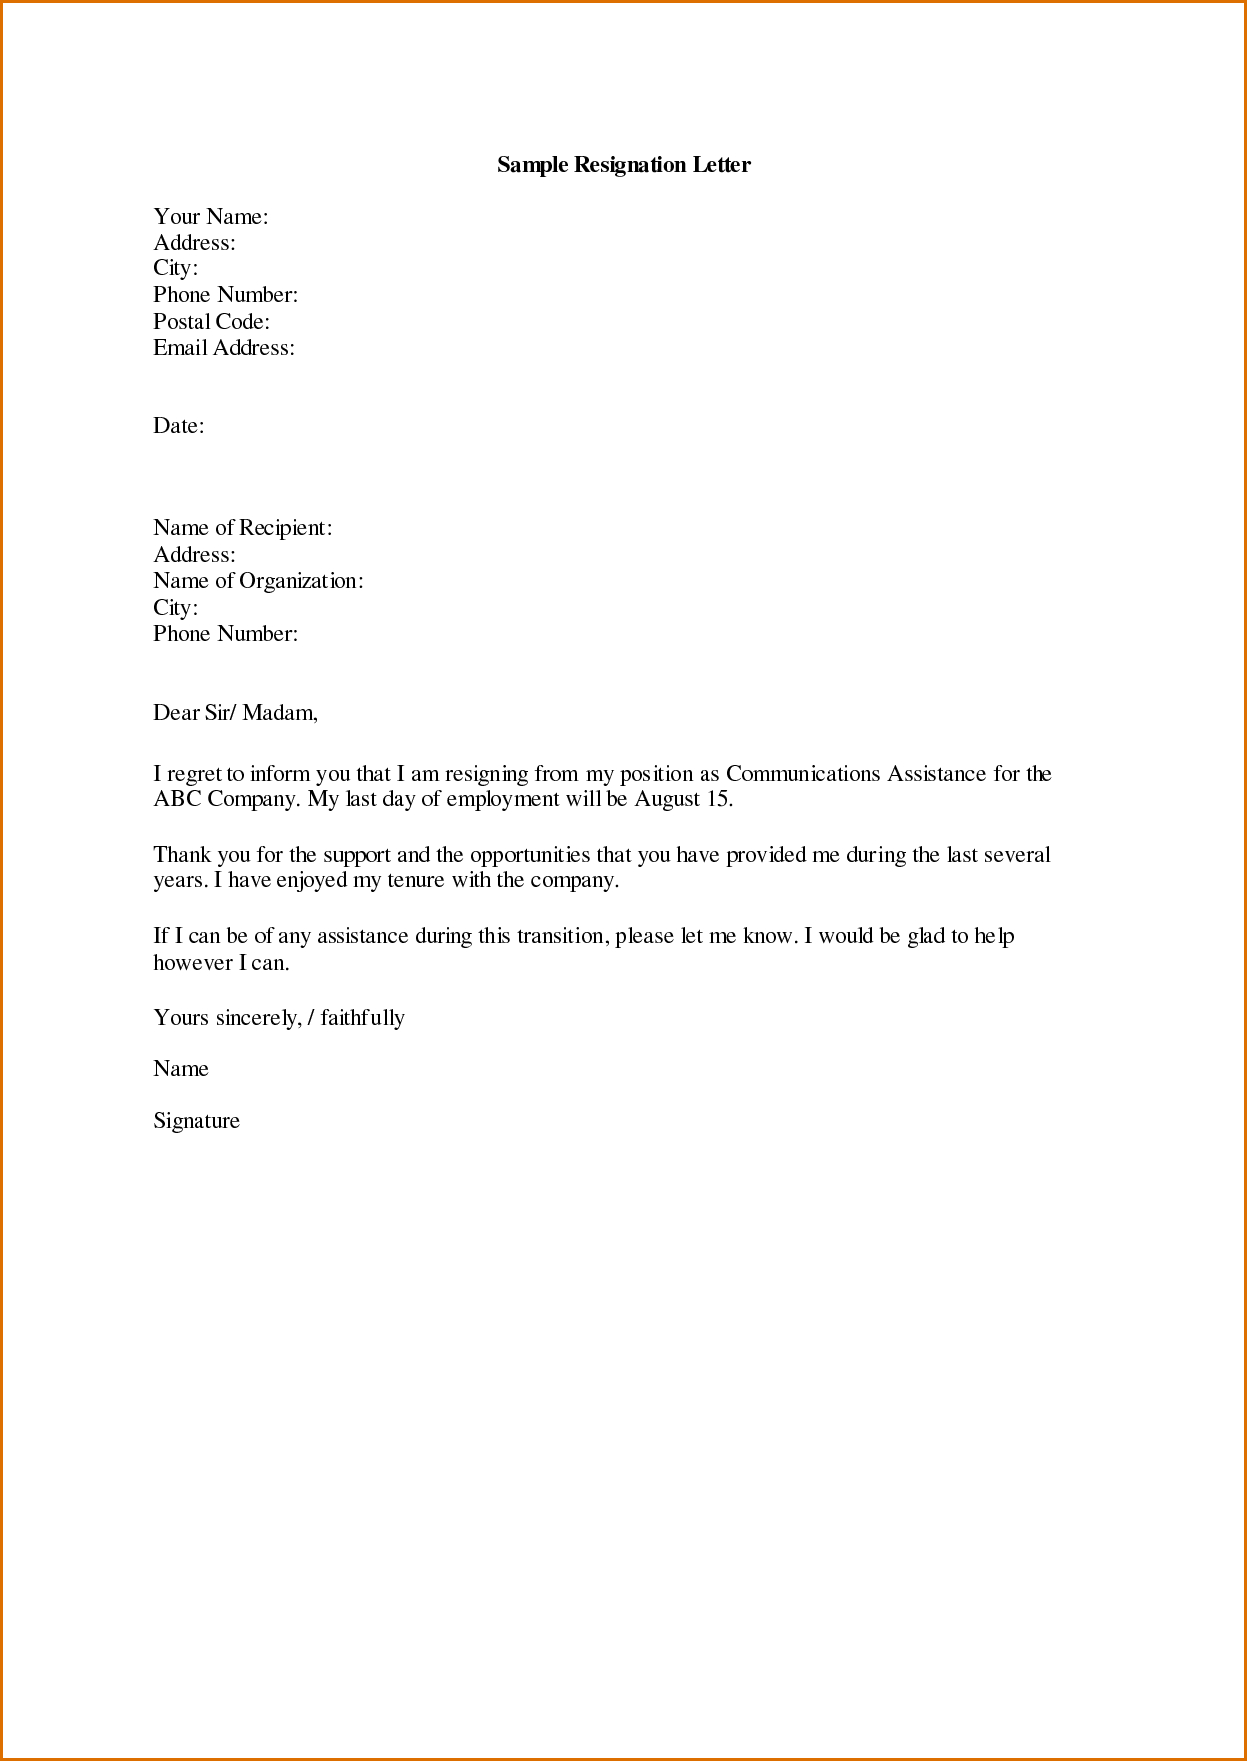 Official Letter Of Resignation Template - Sample Displaying 16 Images for Letter Of Resignation Sample toolbar